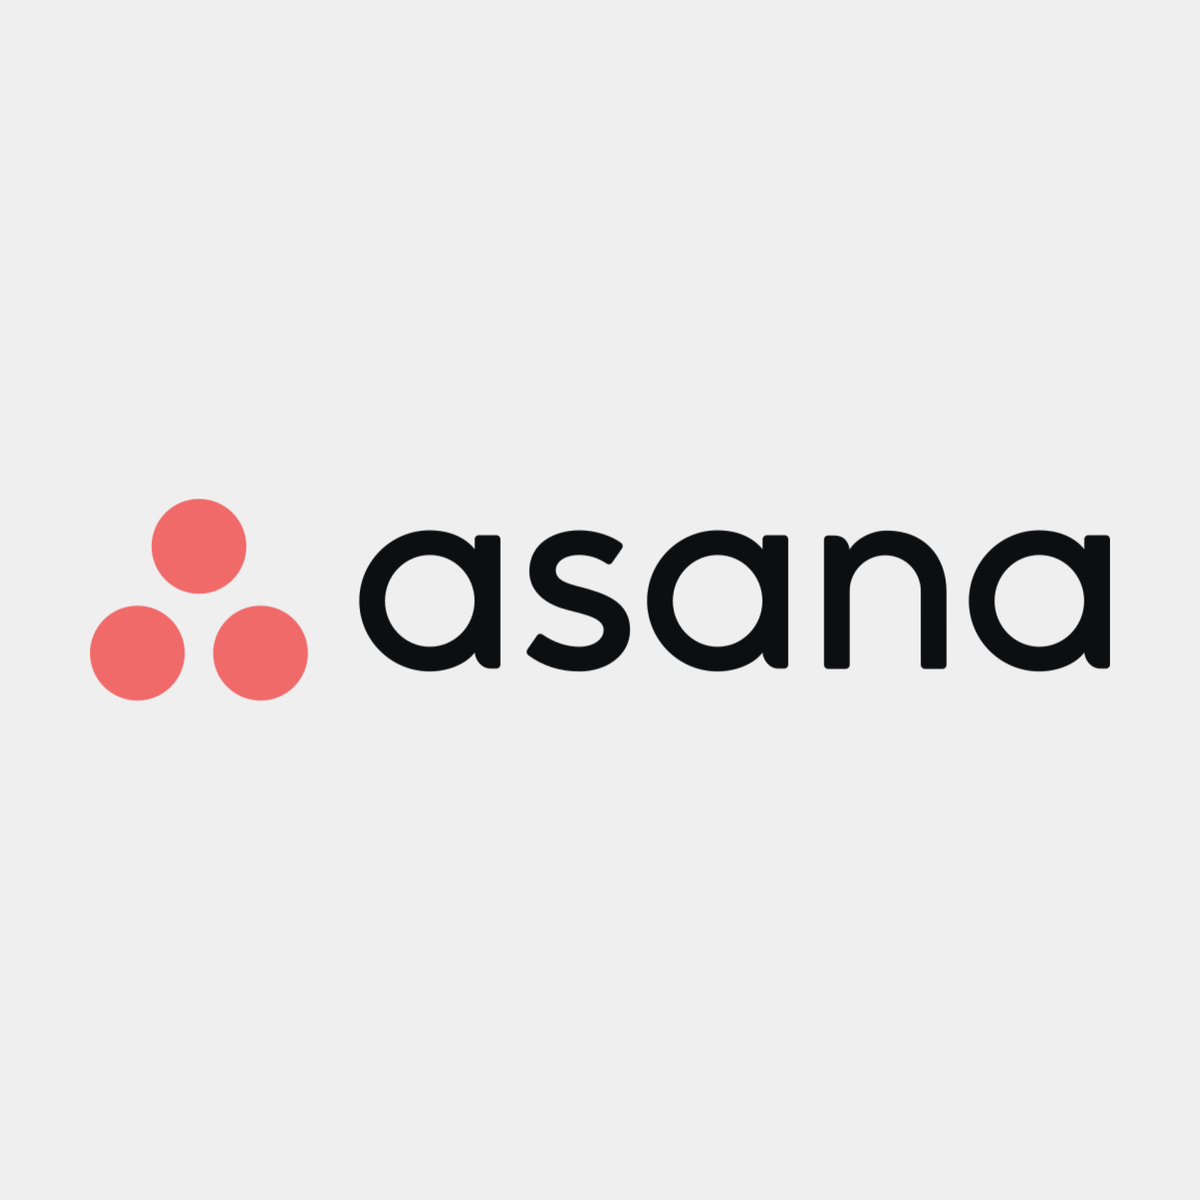 Asana: Project management software review